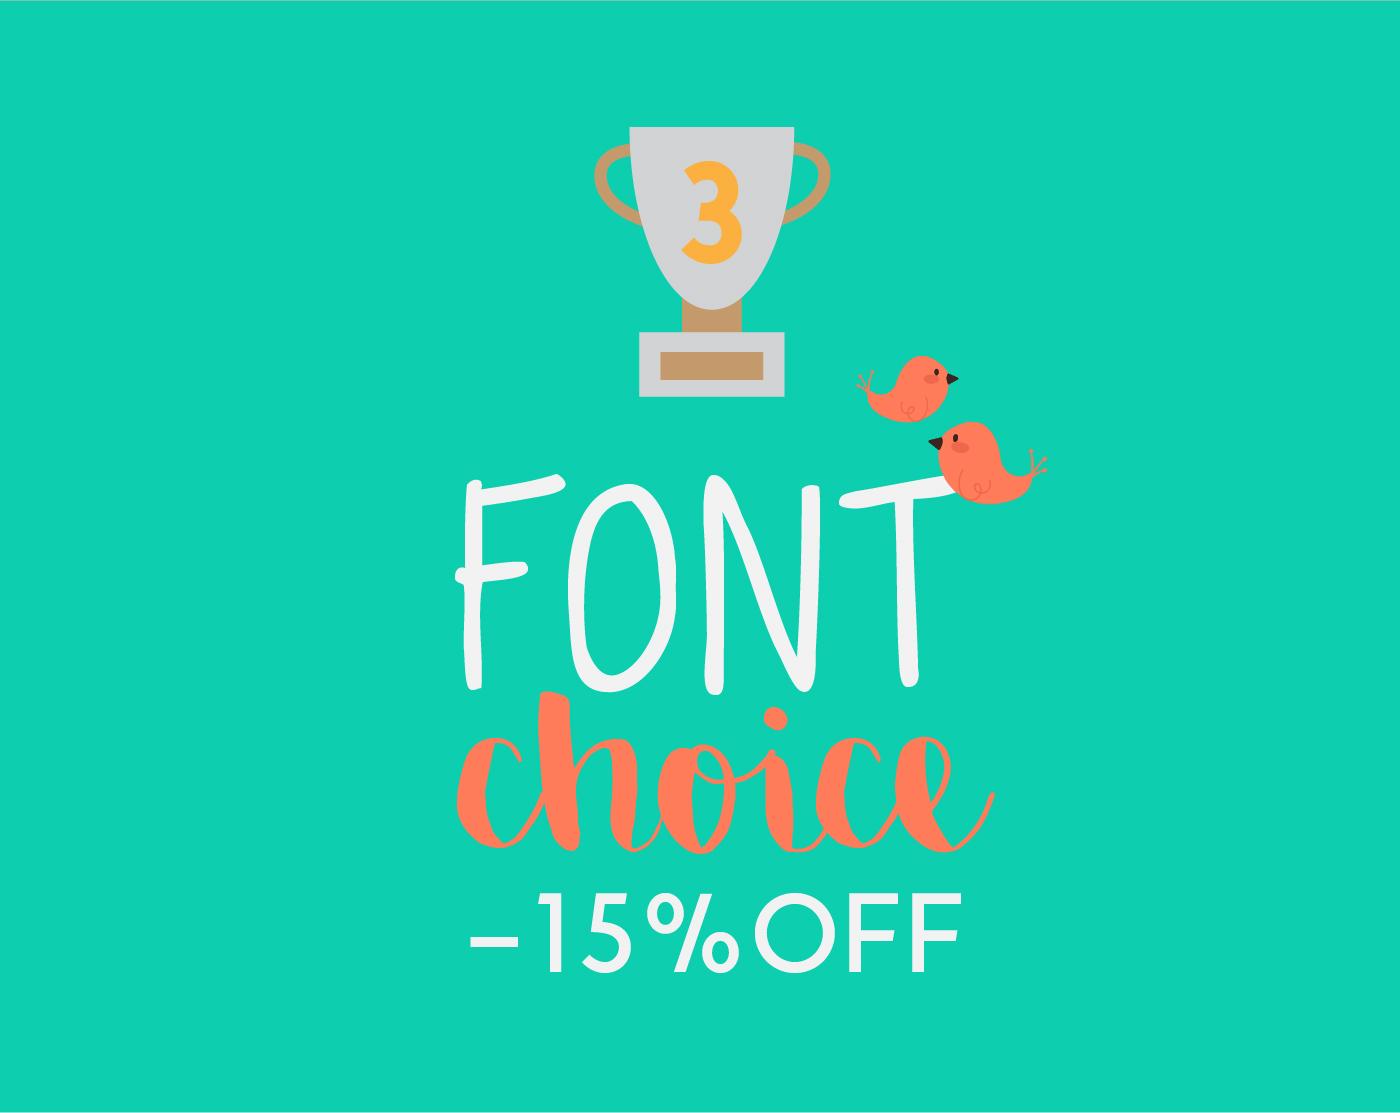 Free font free type free download font fonts prize Typeface type